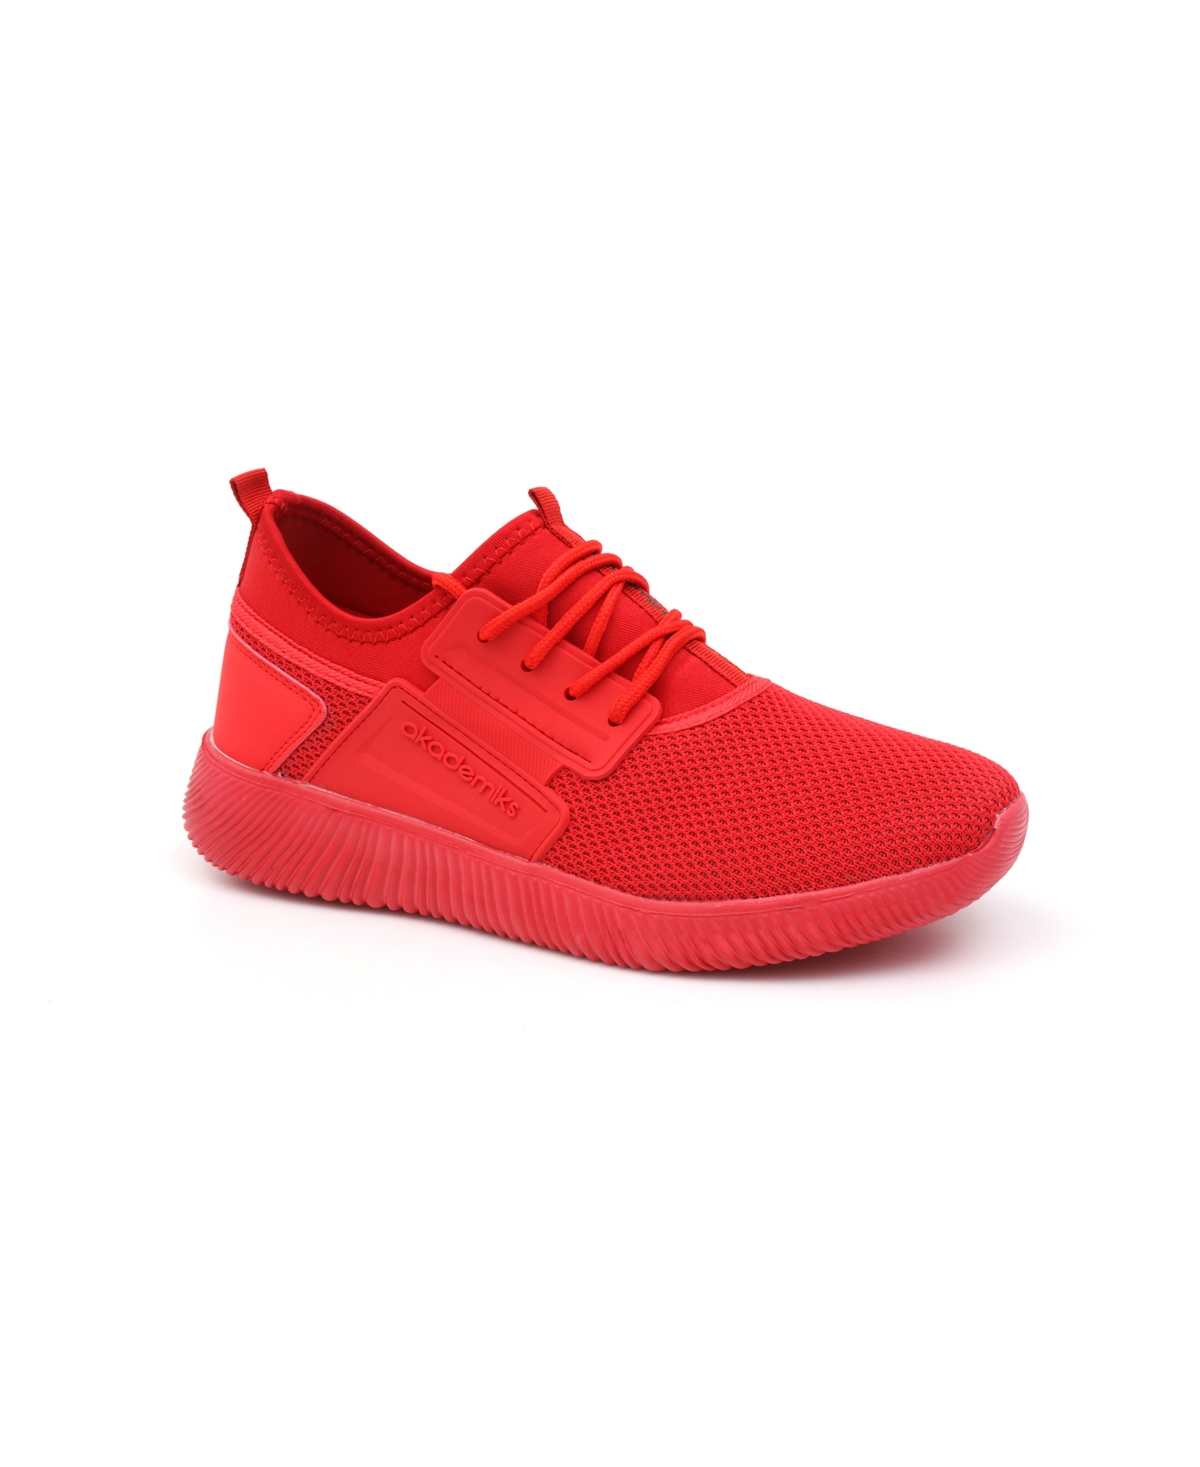 AKADEMIKS MEN'S LACE-UP SONIC KNIT SNEAKERS